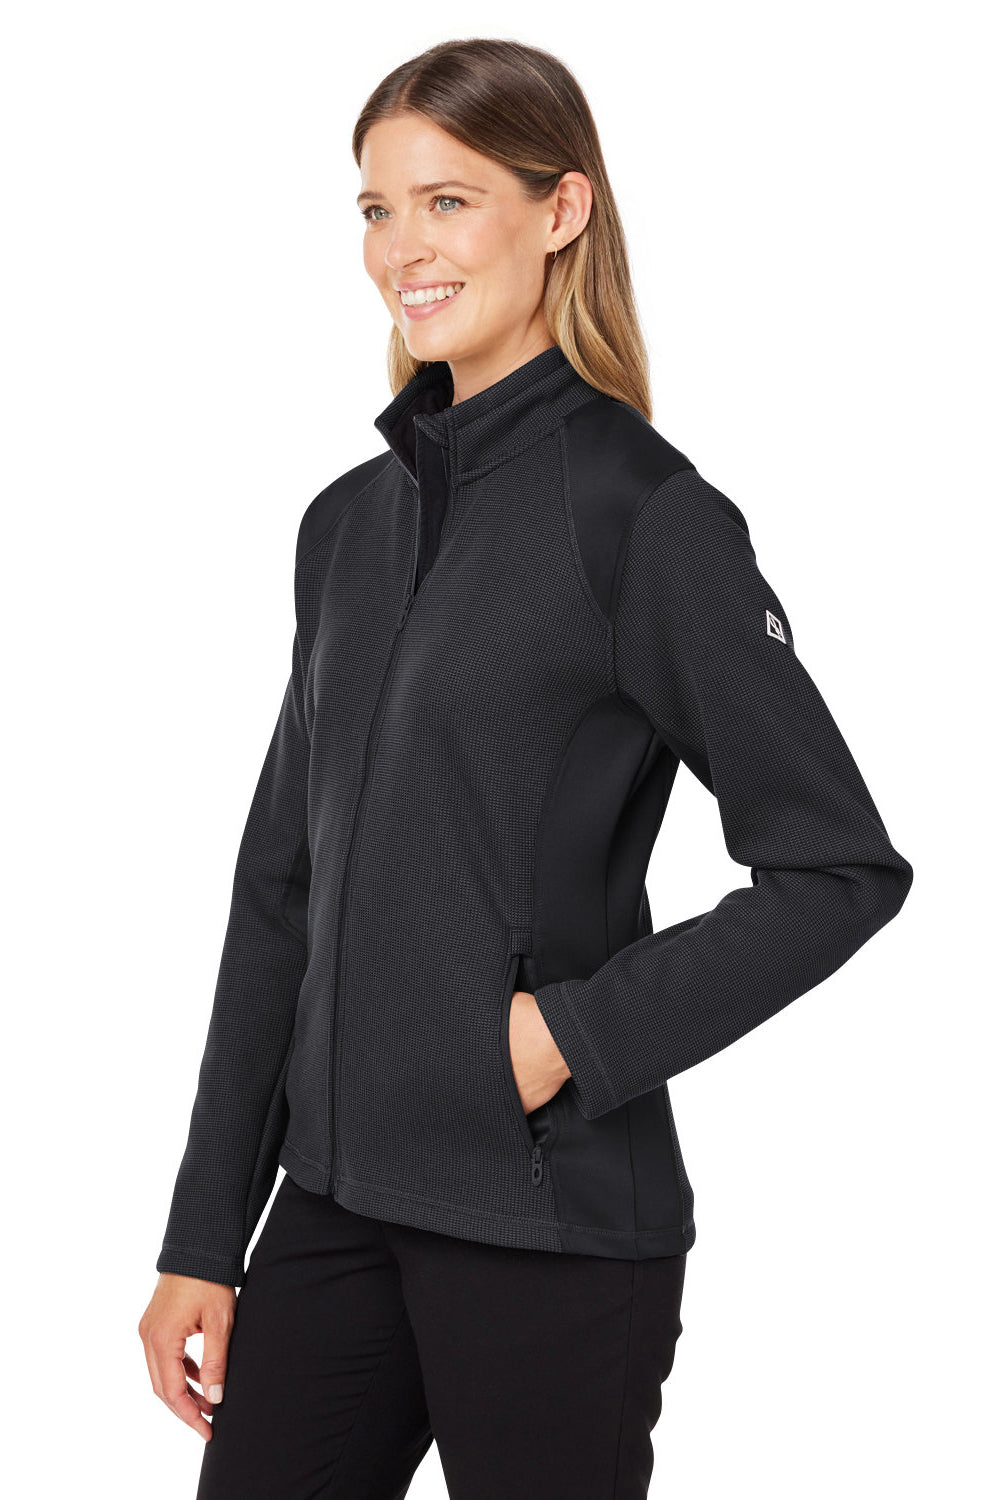 Spyder S17937 Womens Constant Canyon Full Zip Sweater Jacket Black 3Q